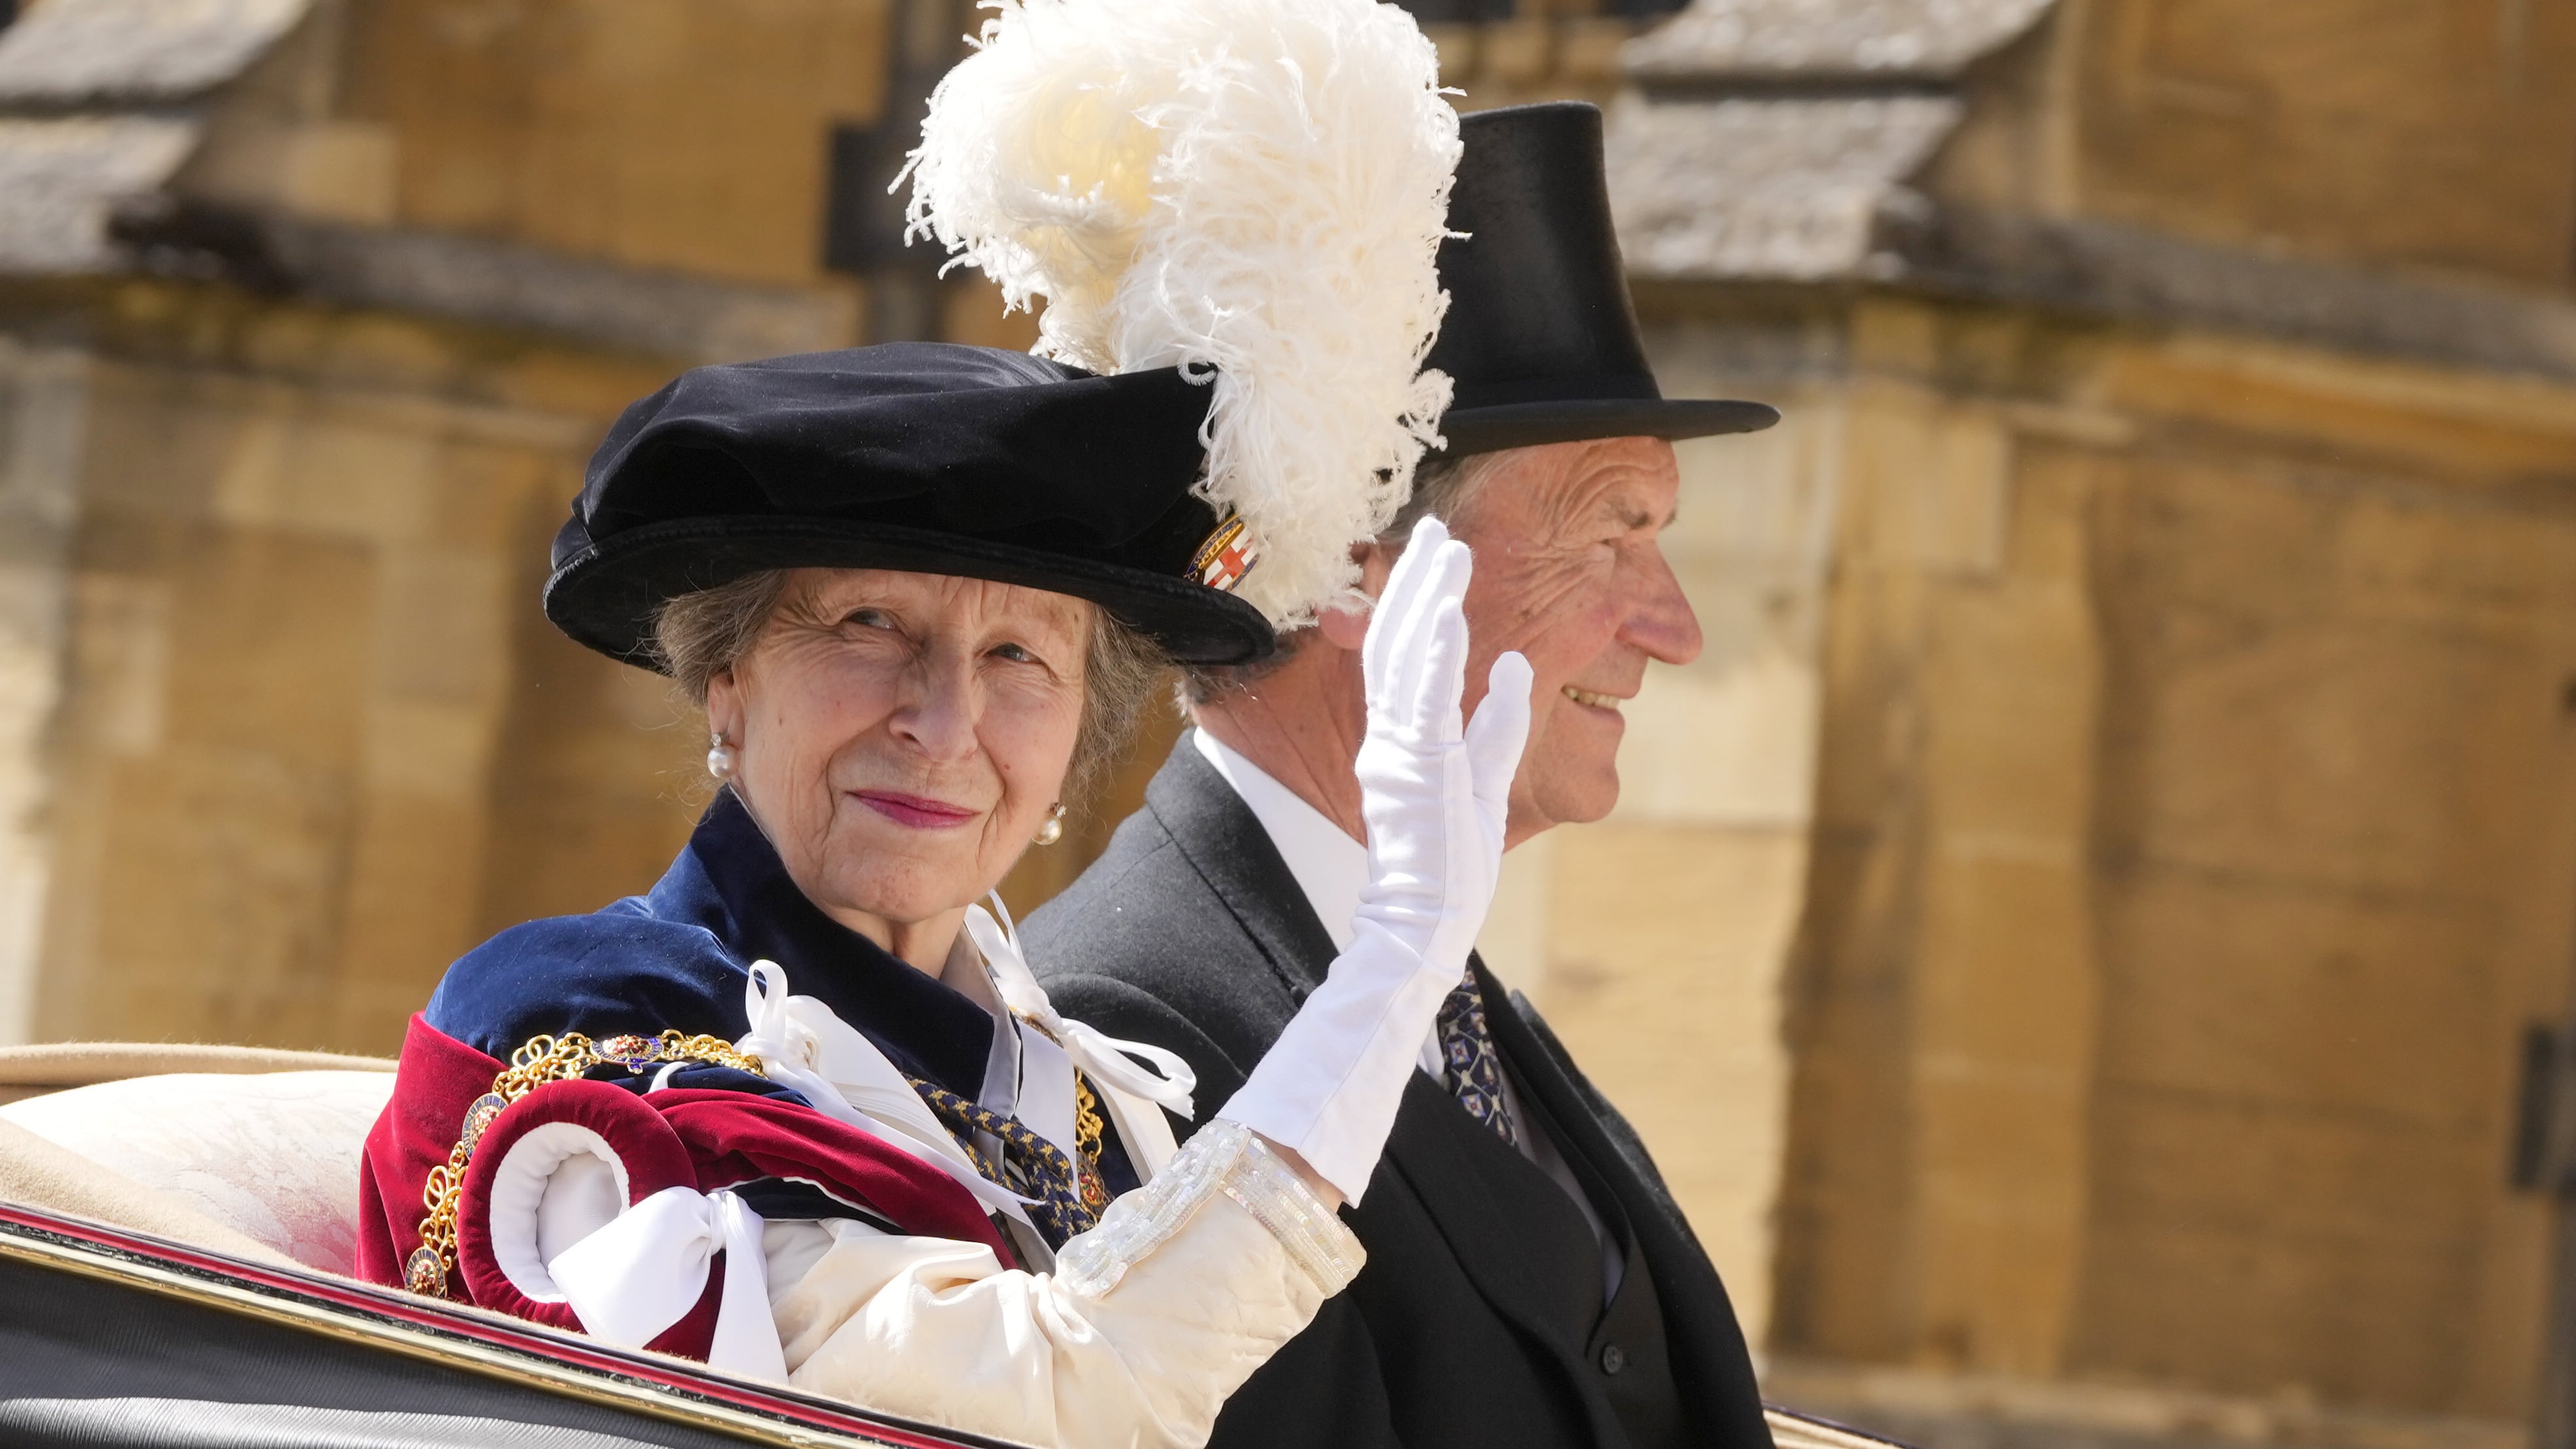 The Princess Royal after attending the annual Order of the Garter Service at St George’s Chapel